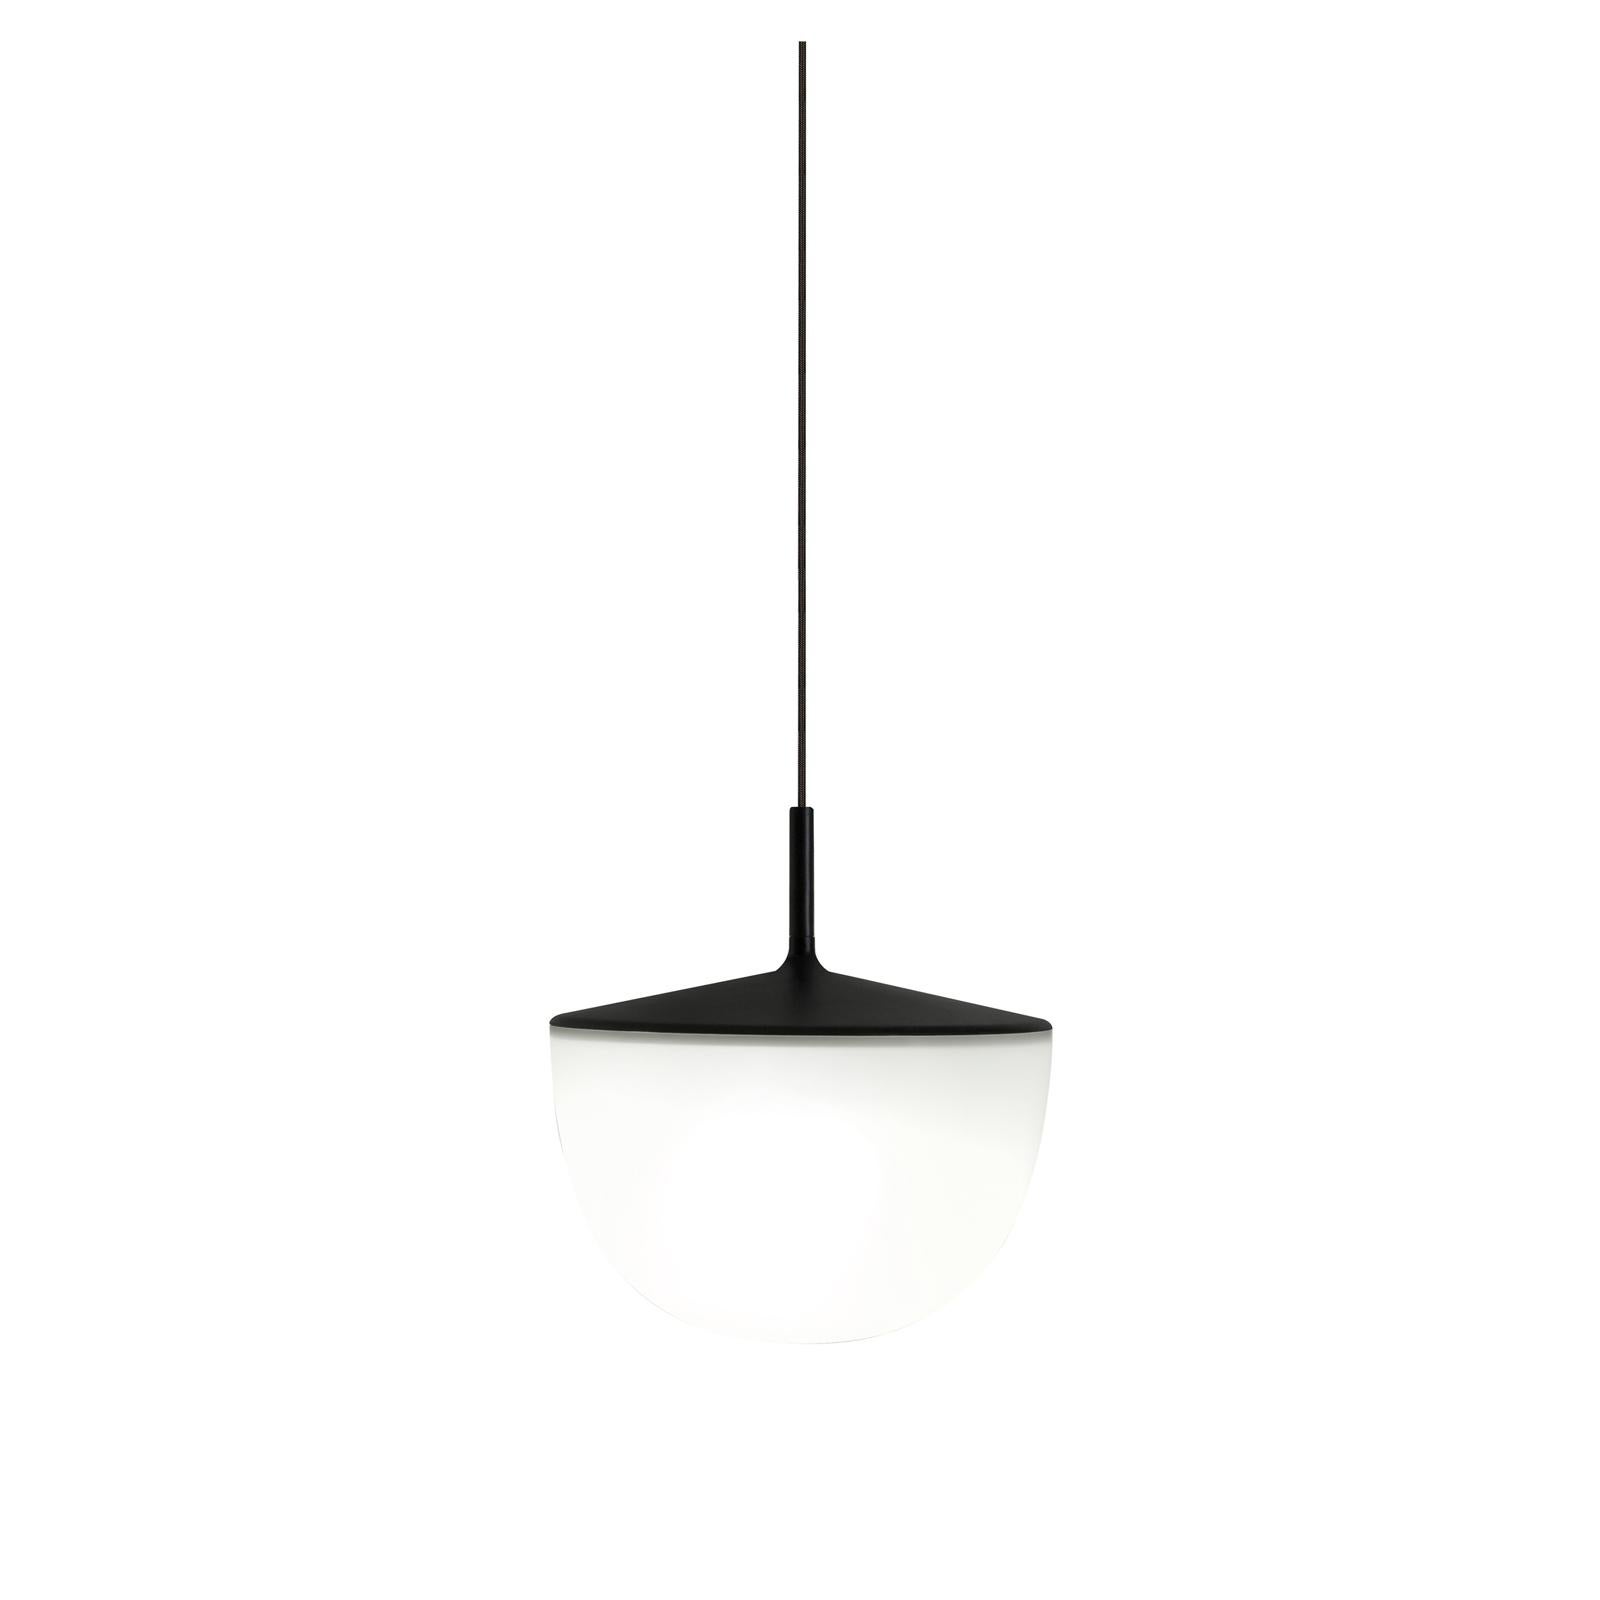 Designed by GamFratesi in 2013 and manufactured by Fontana Arte, the Cheshire suspension lamp echoes the studio’s Nordic imprint in its simplicity and functional aspects. The opaline polycarbonate diffuser ensures soft lighting, while the colored